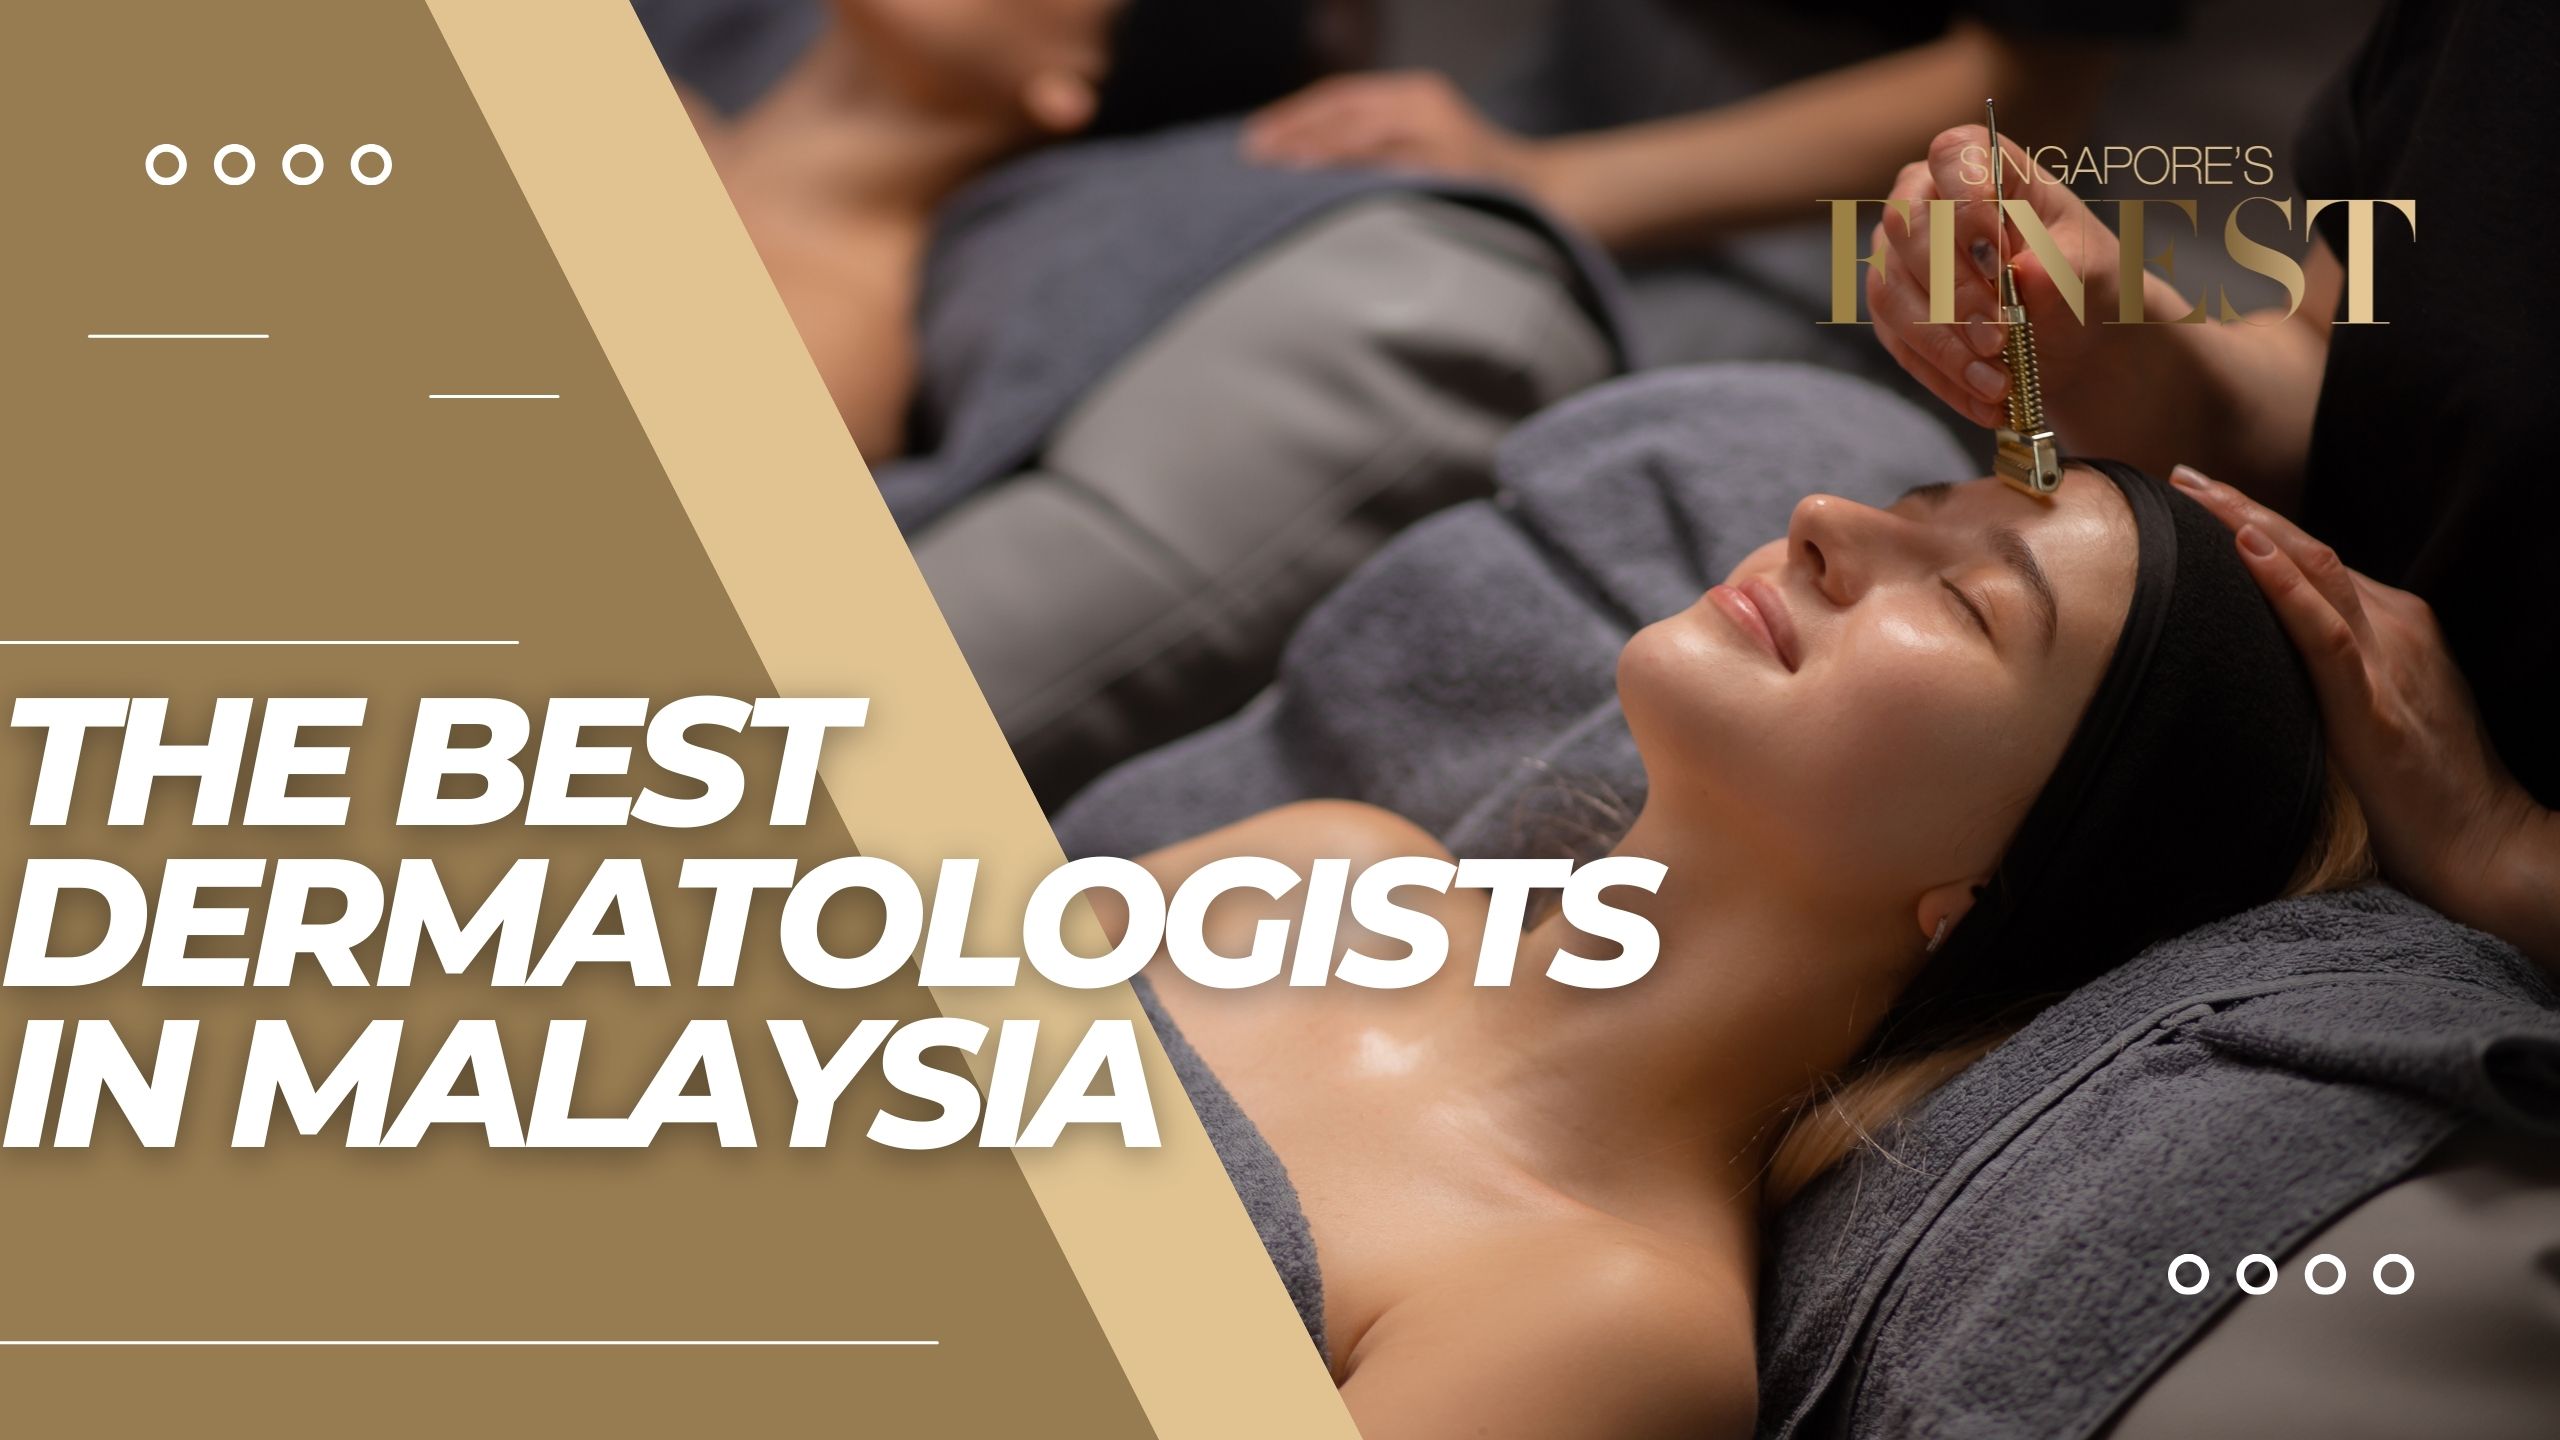 The Finest Dermatologists in Malaysia